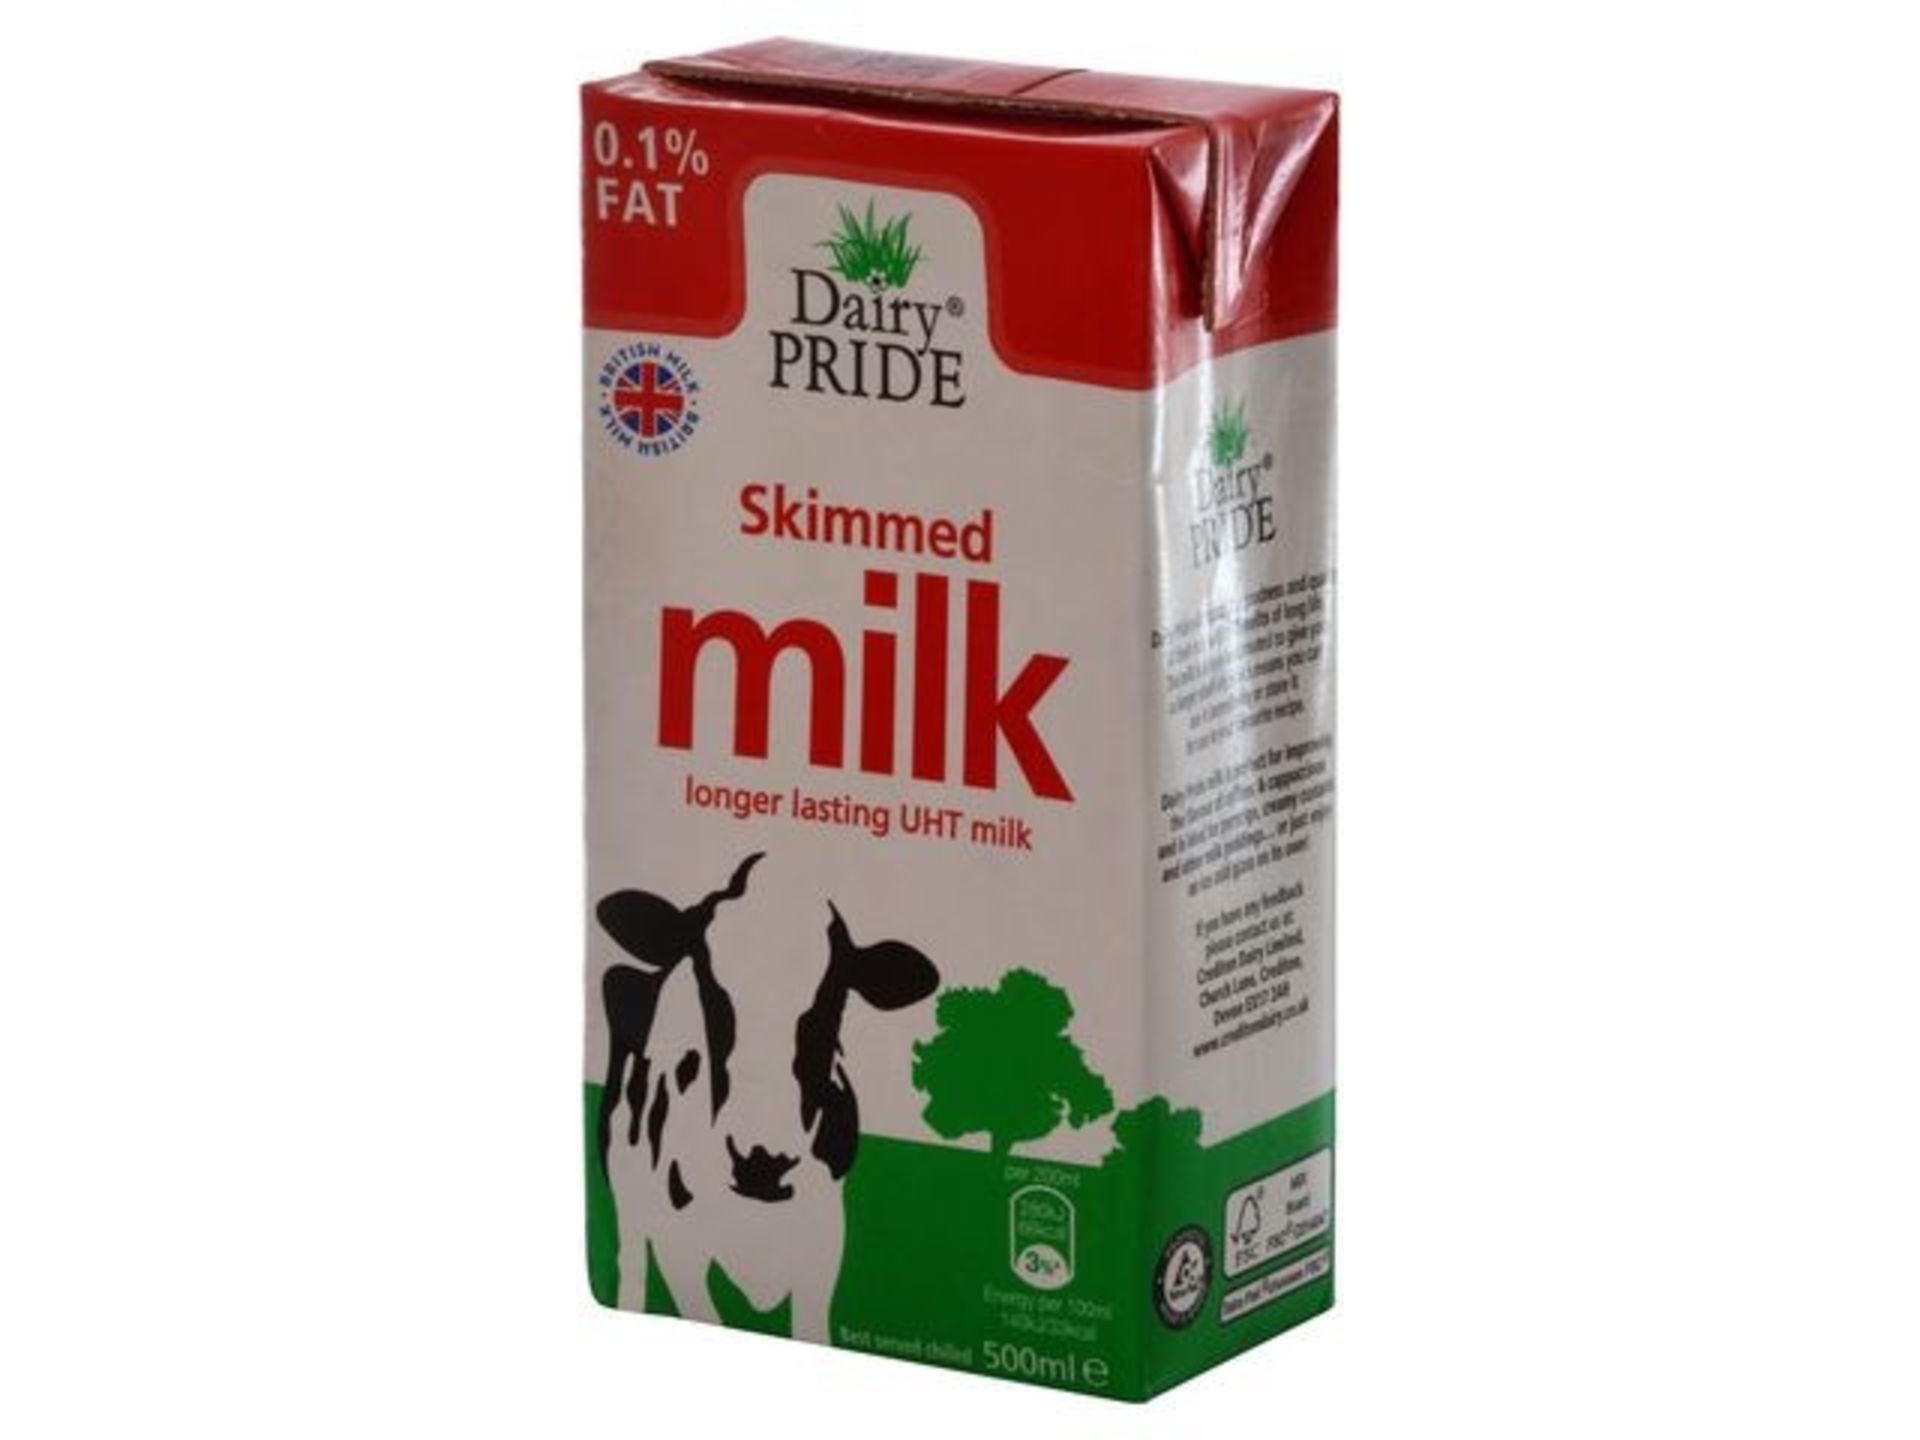 1 LOT TO CONTAIN 36 DAIRY PRIDE LONGER LASTING SKIMMED MILK / BEST BEFORE DATE 11.08.19 / PN - 612 /